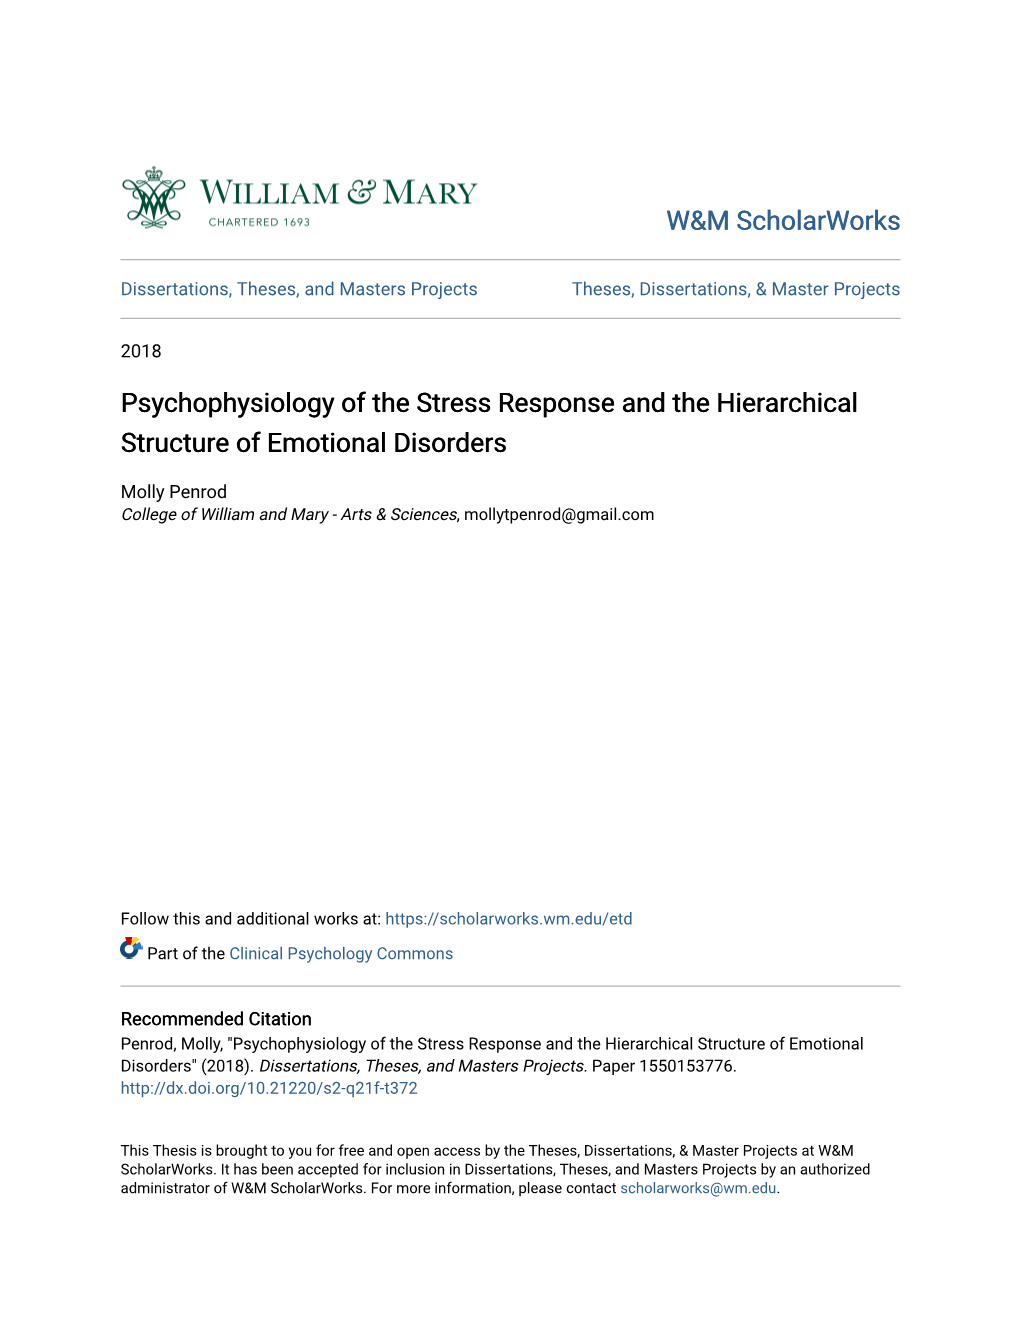 Psychophysiology of the Stress Response and the Hierarchical Structure of Emotional Disorders